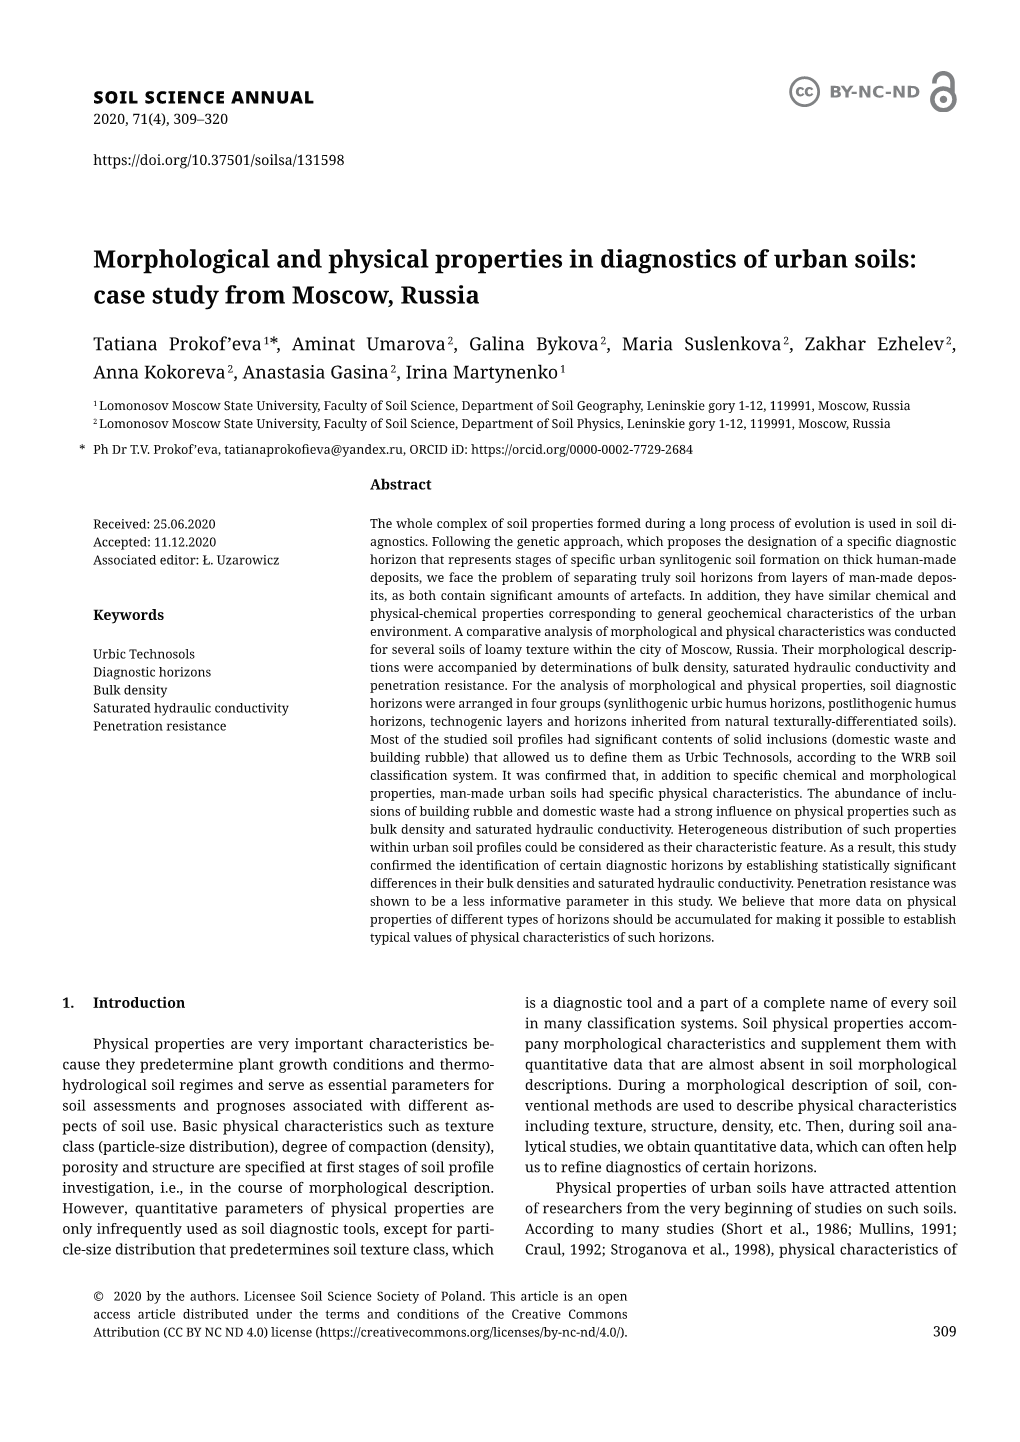 Morphological and Physical Properties in Diagnostics of Urban Soils: Case Study from Moscow, Russia